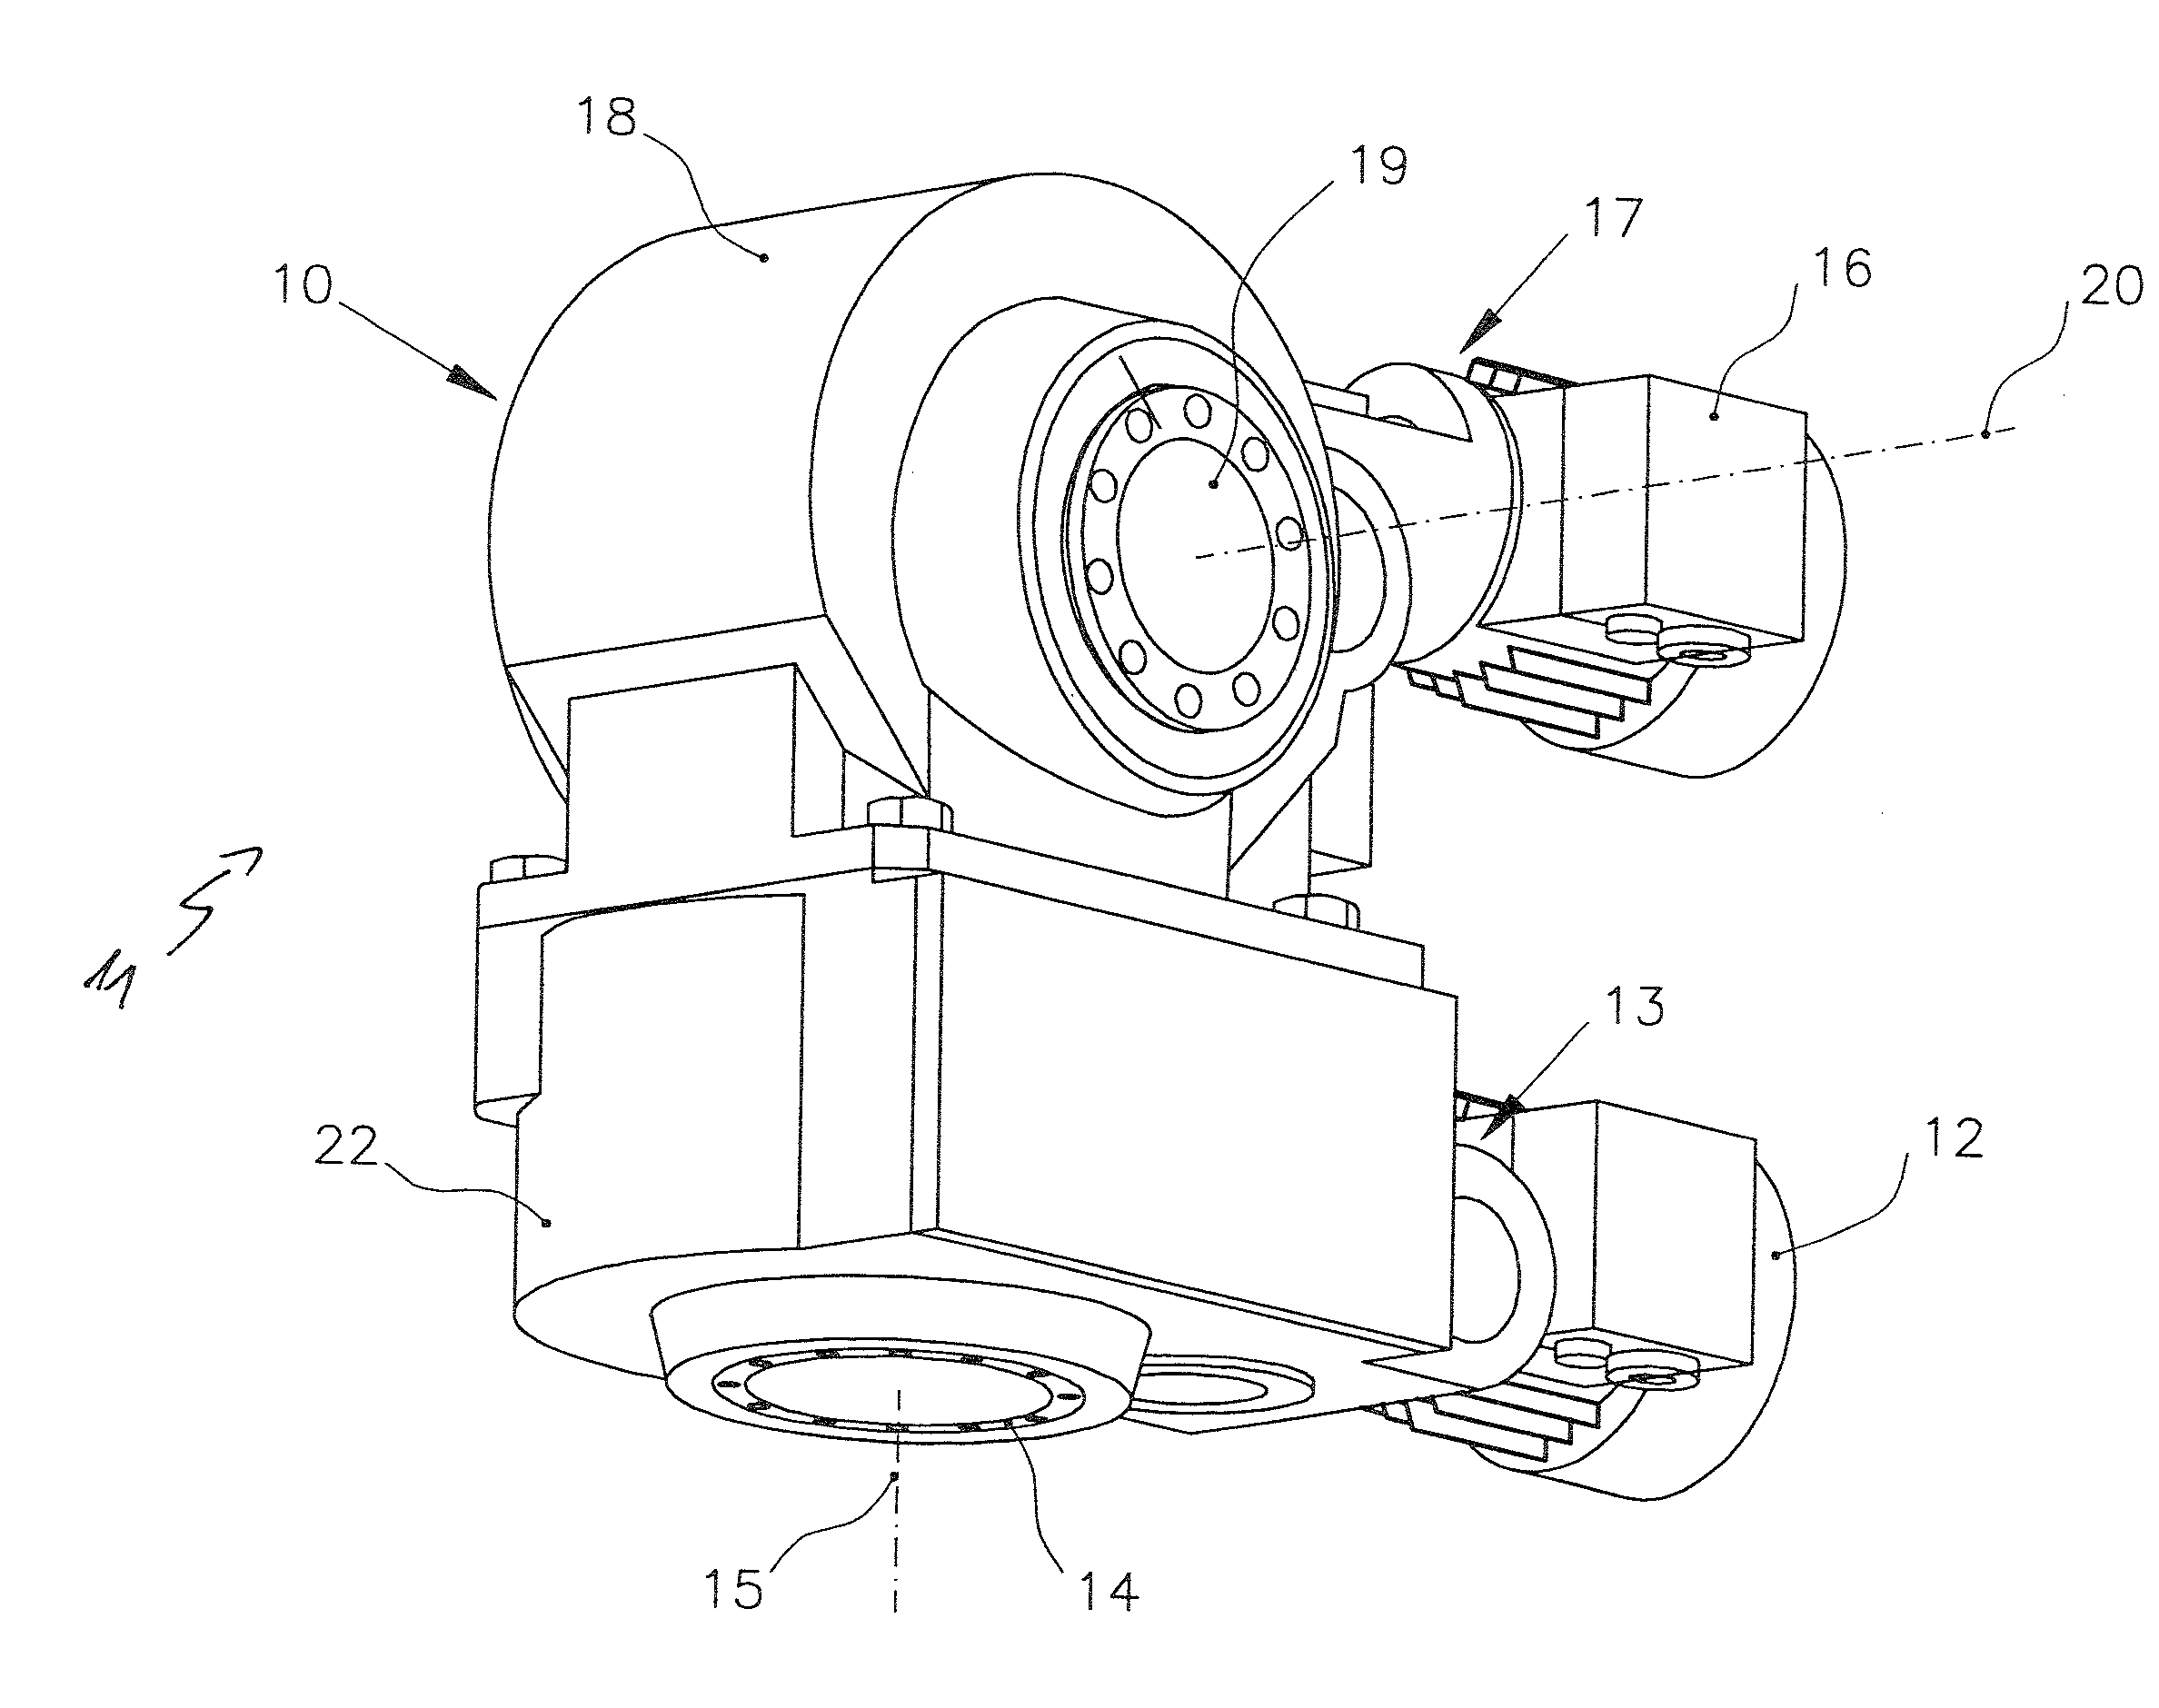 Two-axle drive system